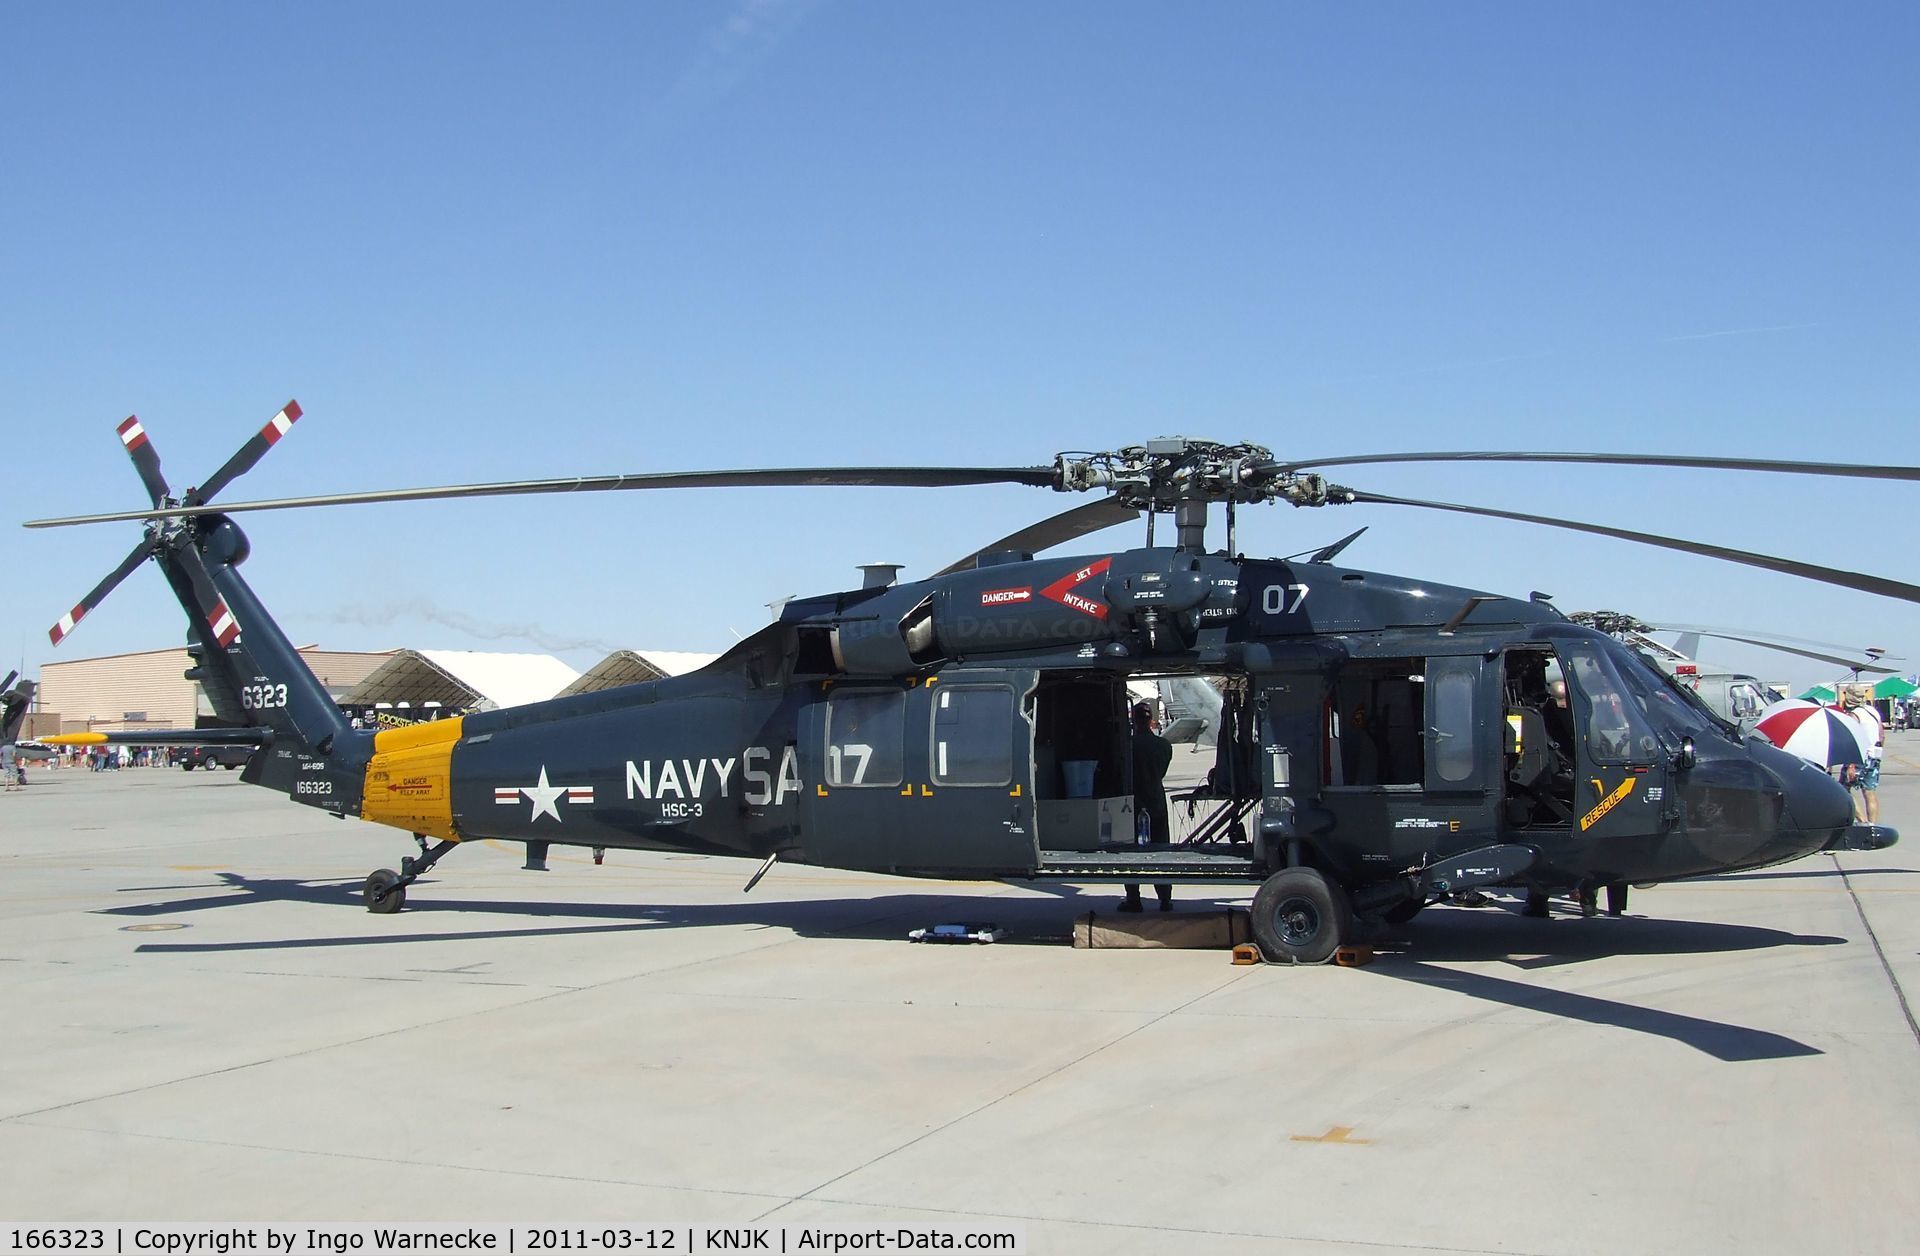 166323, Sikorsky MH-60S Knighthawk C/N 70-2832, Sikorsky MH-60S Seahawk / Knighthawk at the 2011 airshow at El Centro NAS, CA